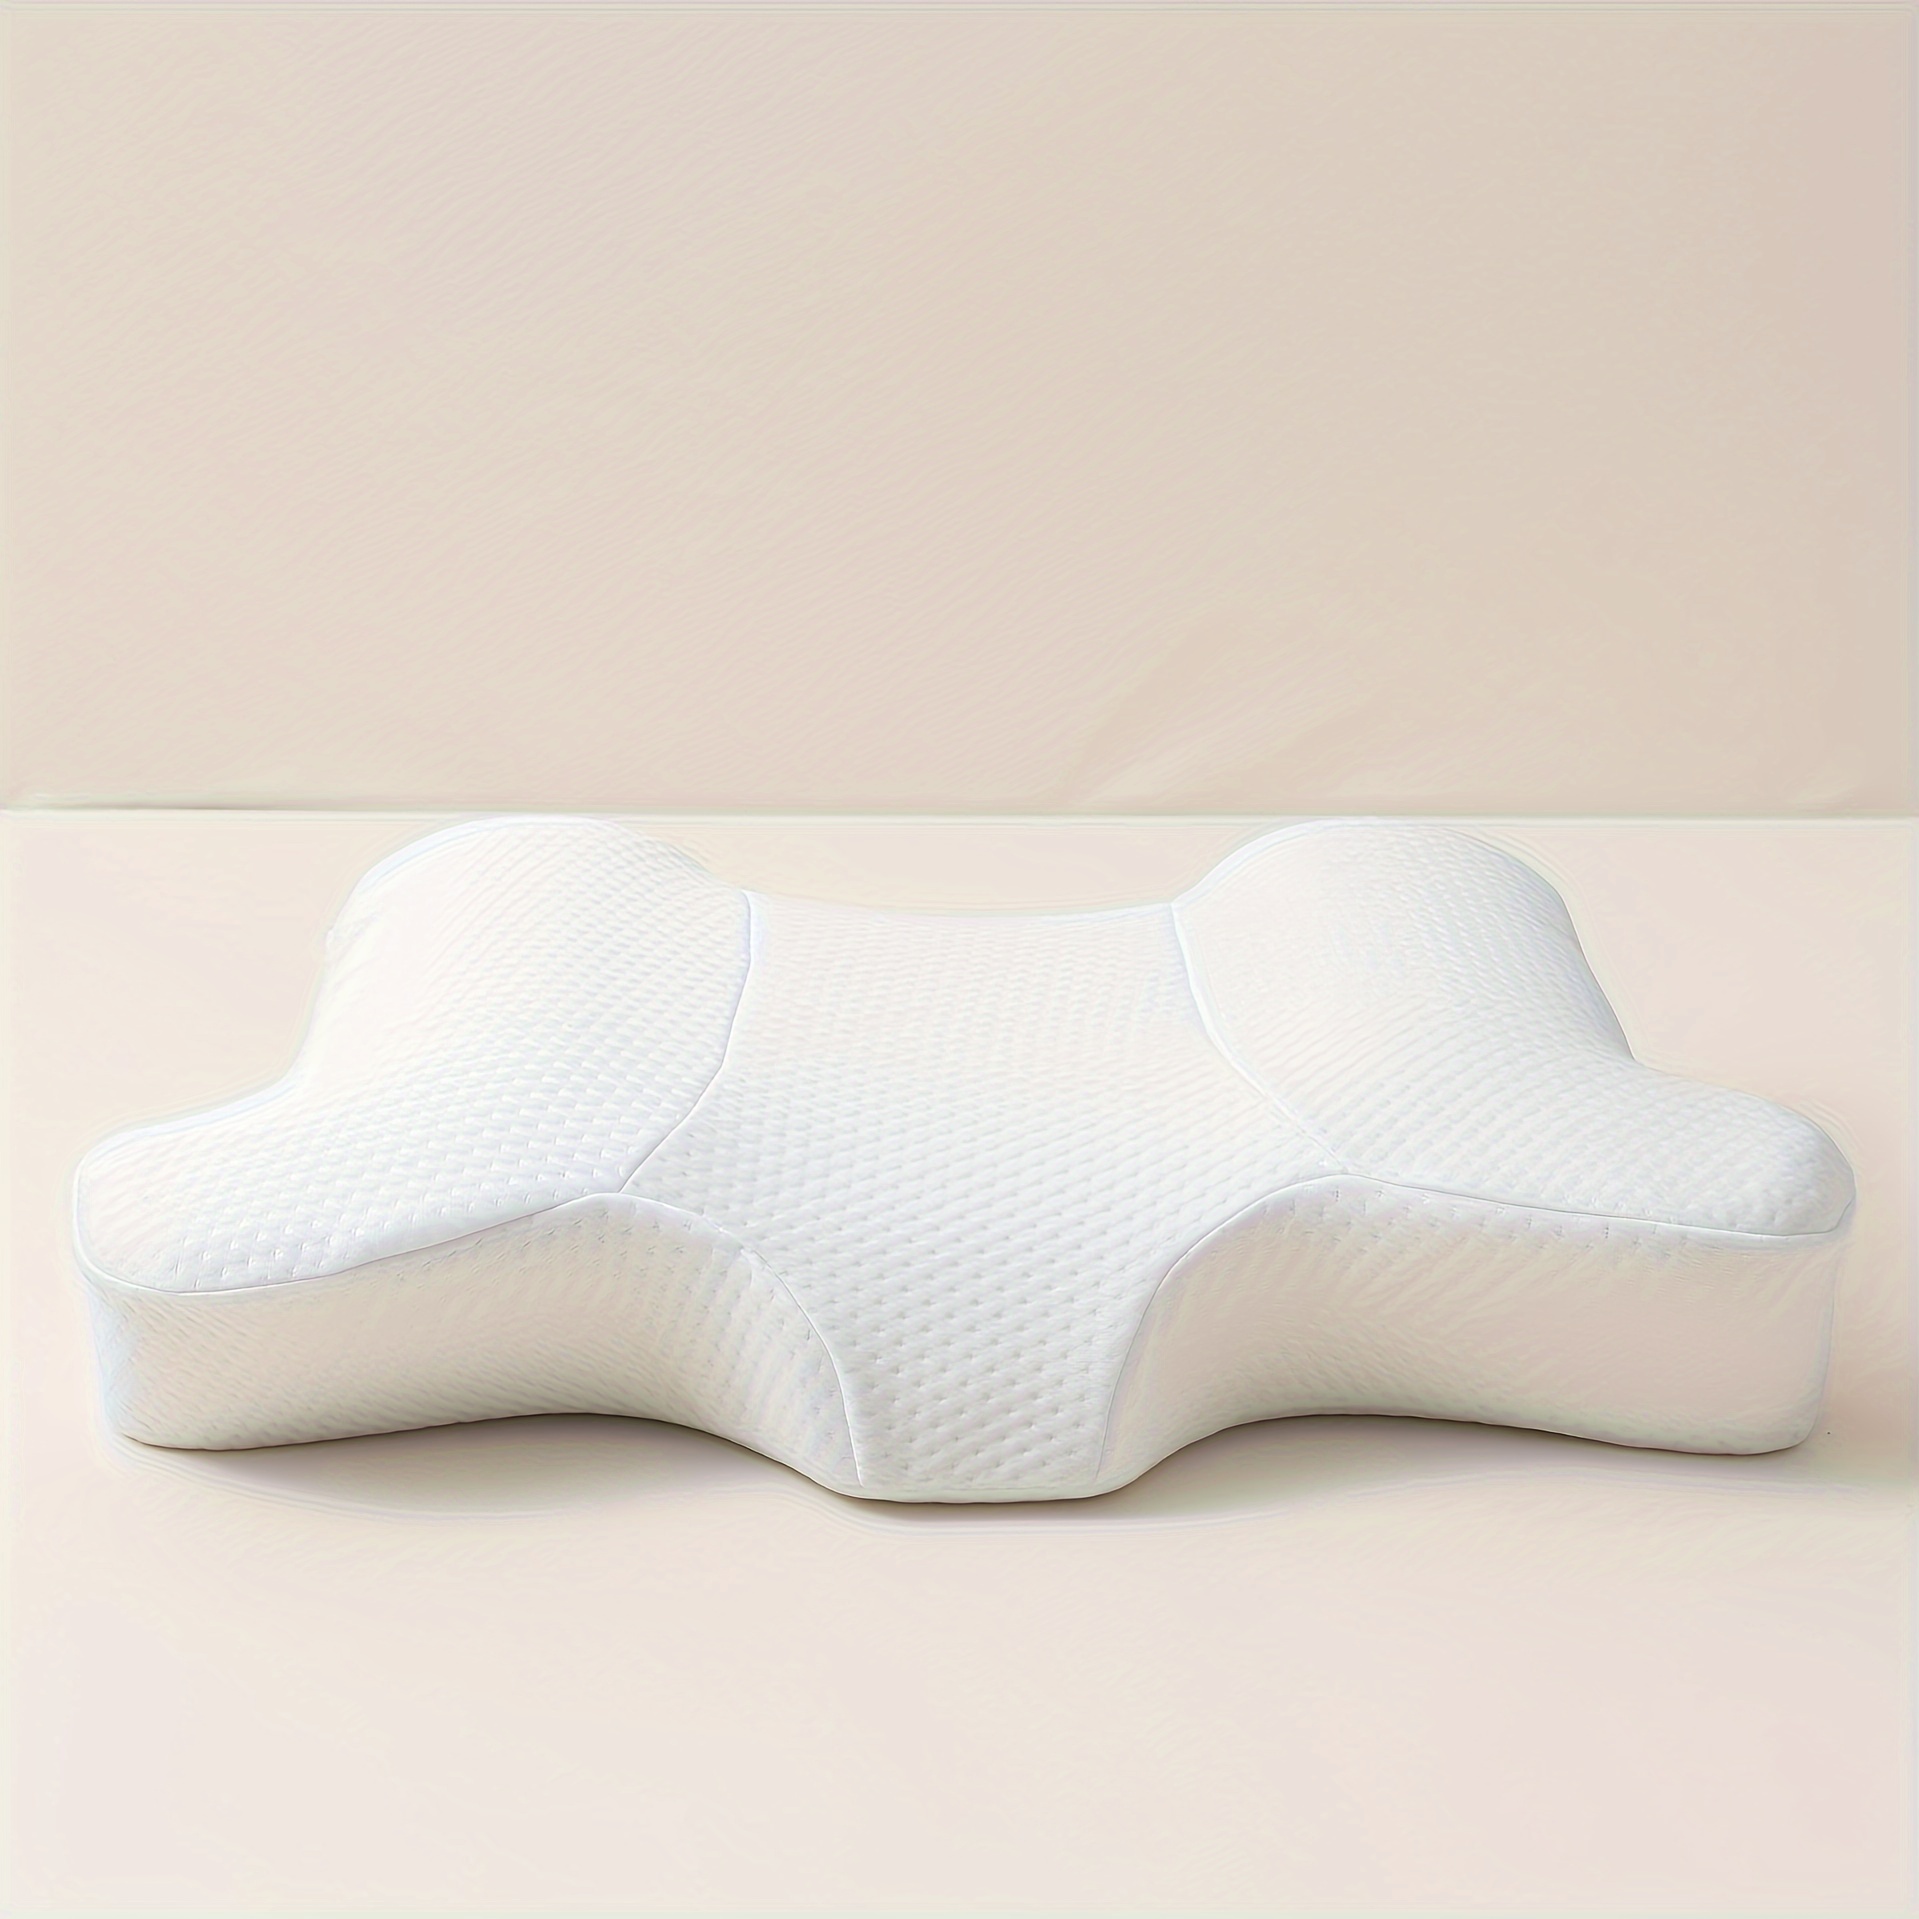 Training Yourself to Sleep on Your Back Isn't Easy: Back-Sleep Training  Tips from the Inventor of the Back to Beauty Anti-Wrinkle Head Cradle  Beauty Pillow - Back To Beauty Sleep